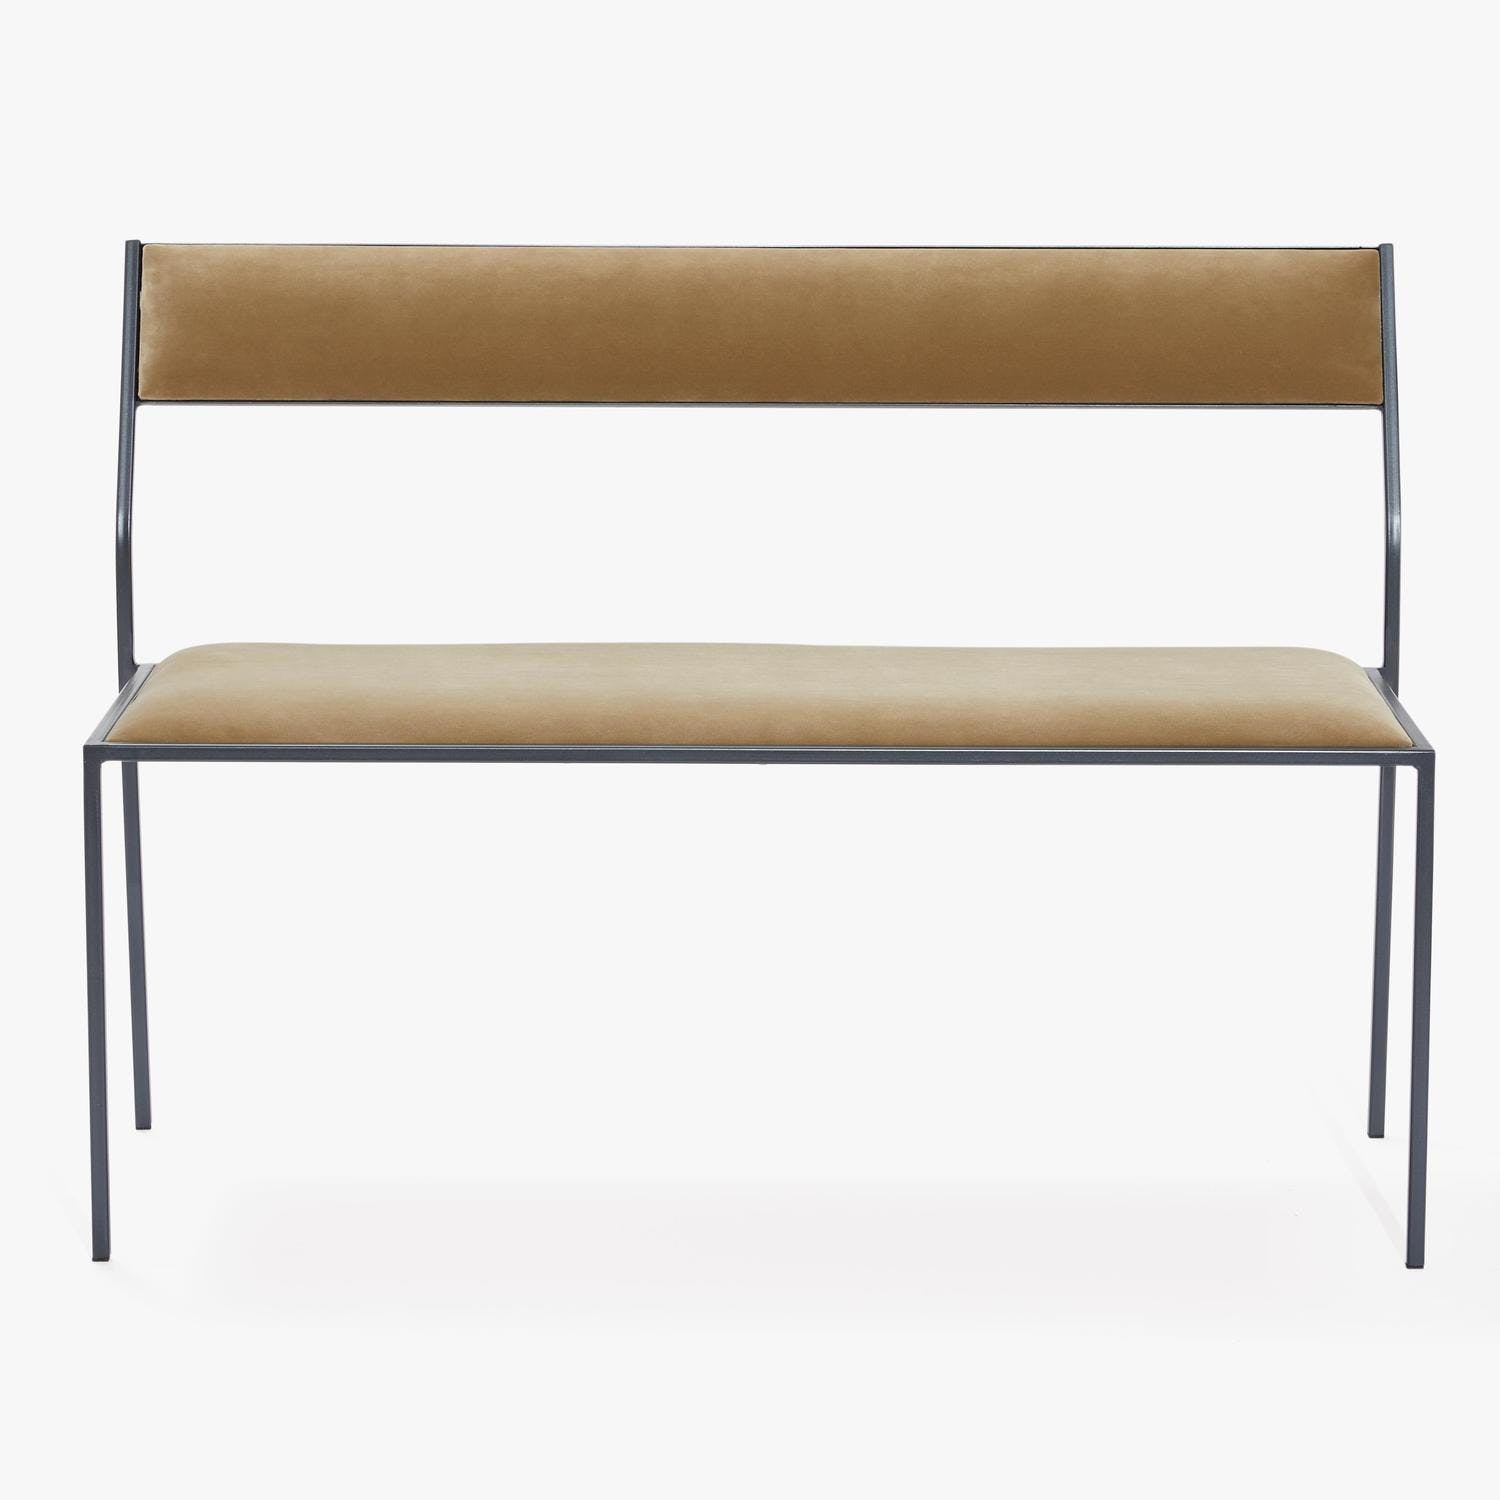 Contemporary steel bench with upholstered tan fabric, minimalist design.